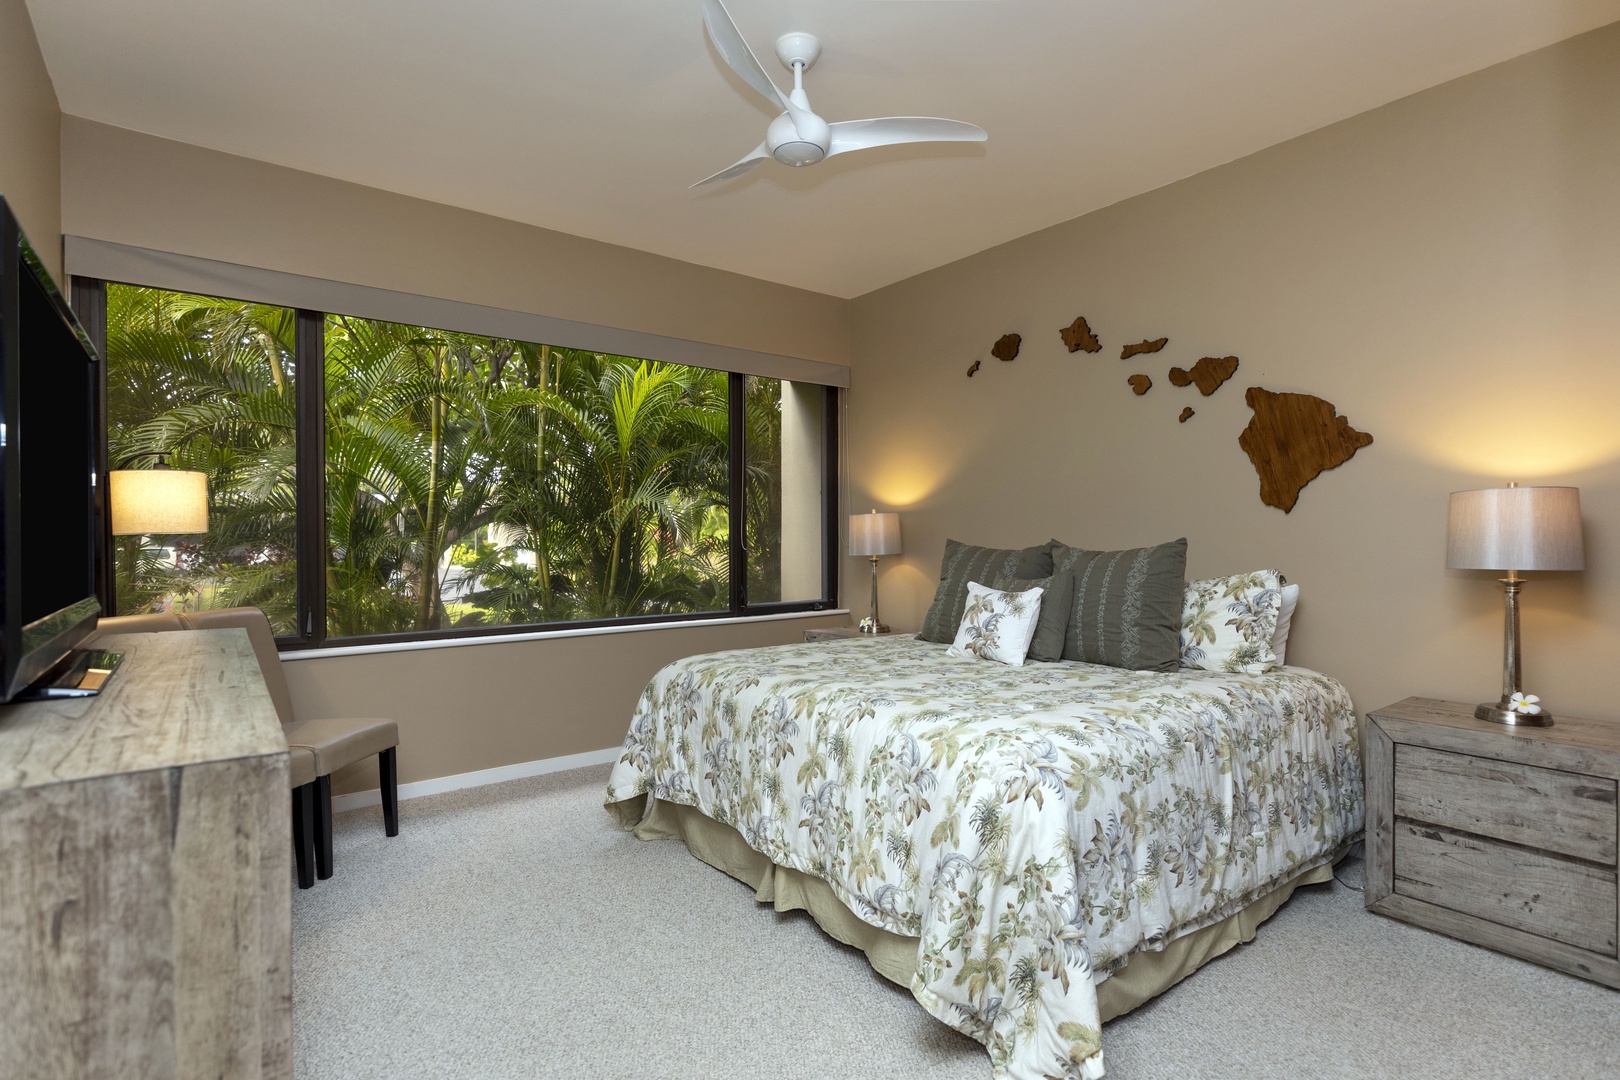 Kamuela Vacation Rentals, Mauna Lani Point E105 - Any guest would love to fall asleep here.